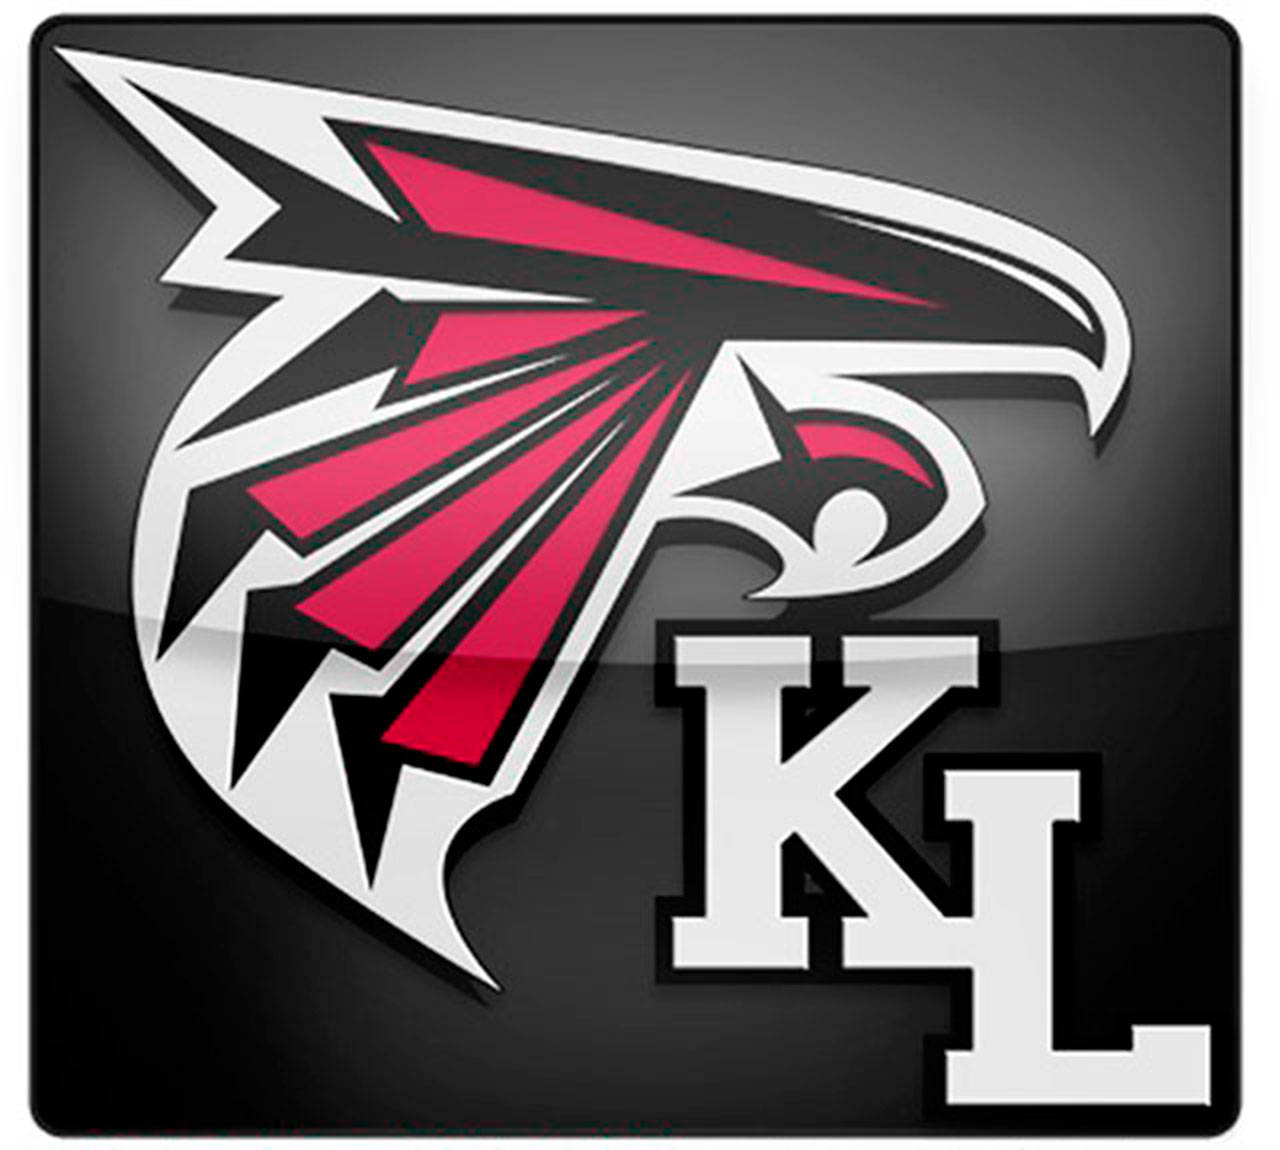 There’s a new Falcon joining Kentlake High